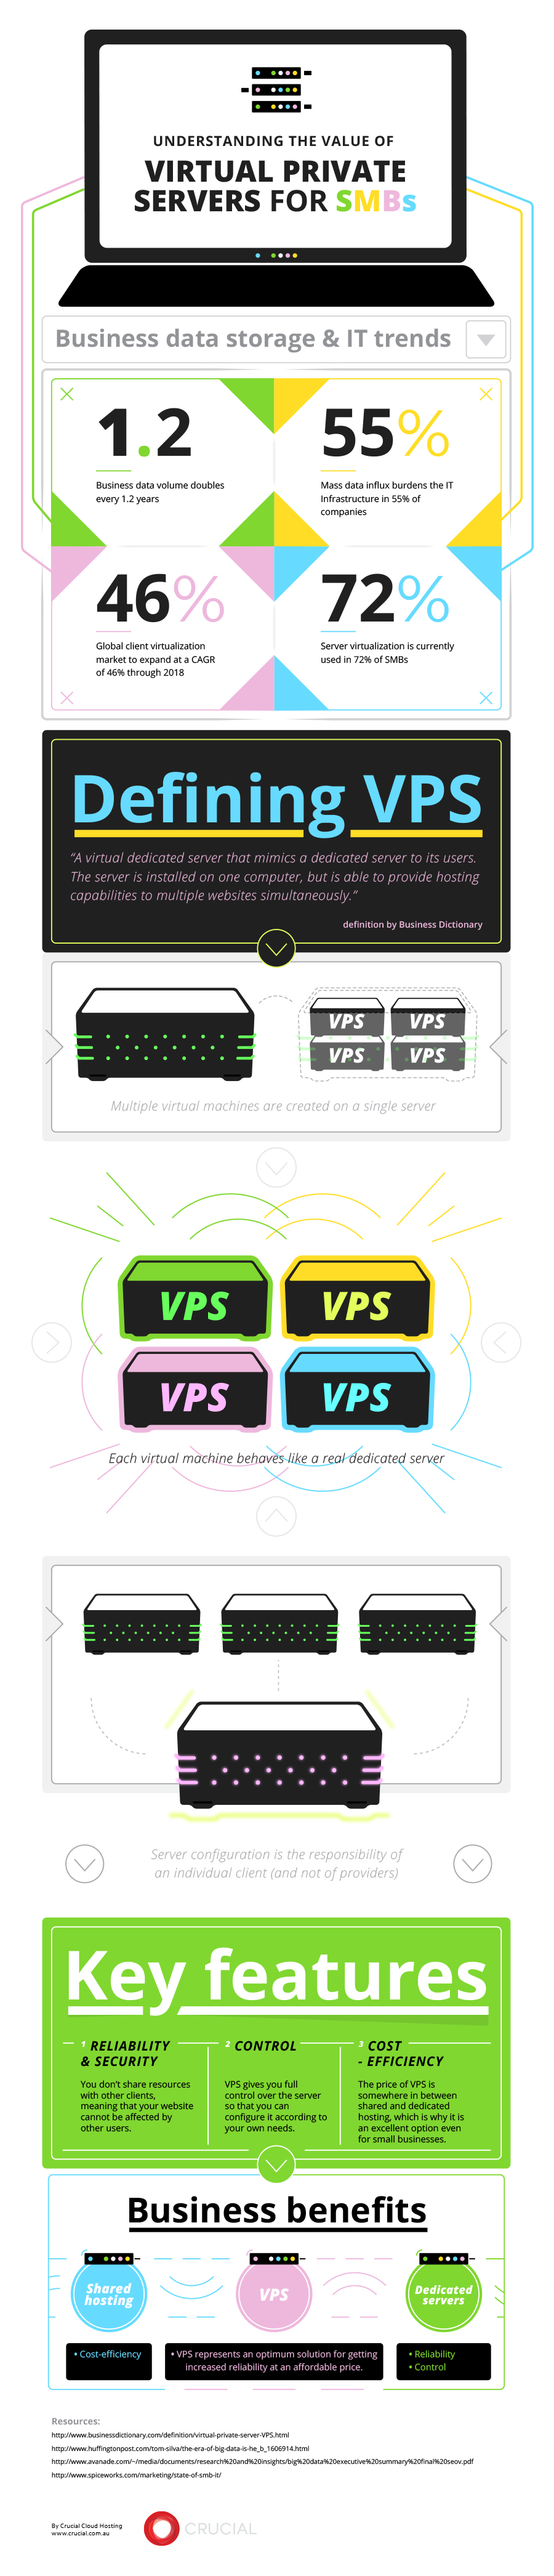 Infographic: Understanding the Value of Virtual Private Servers for ...